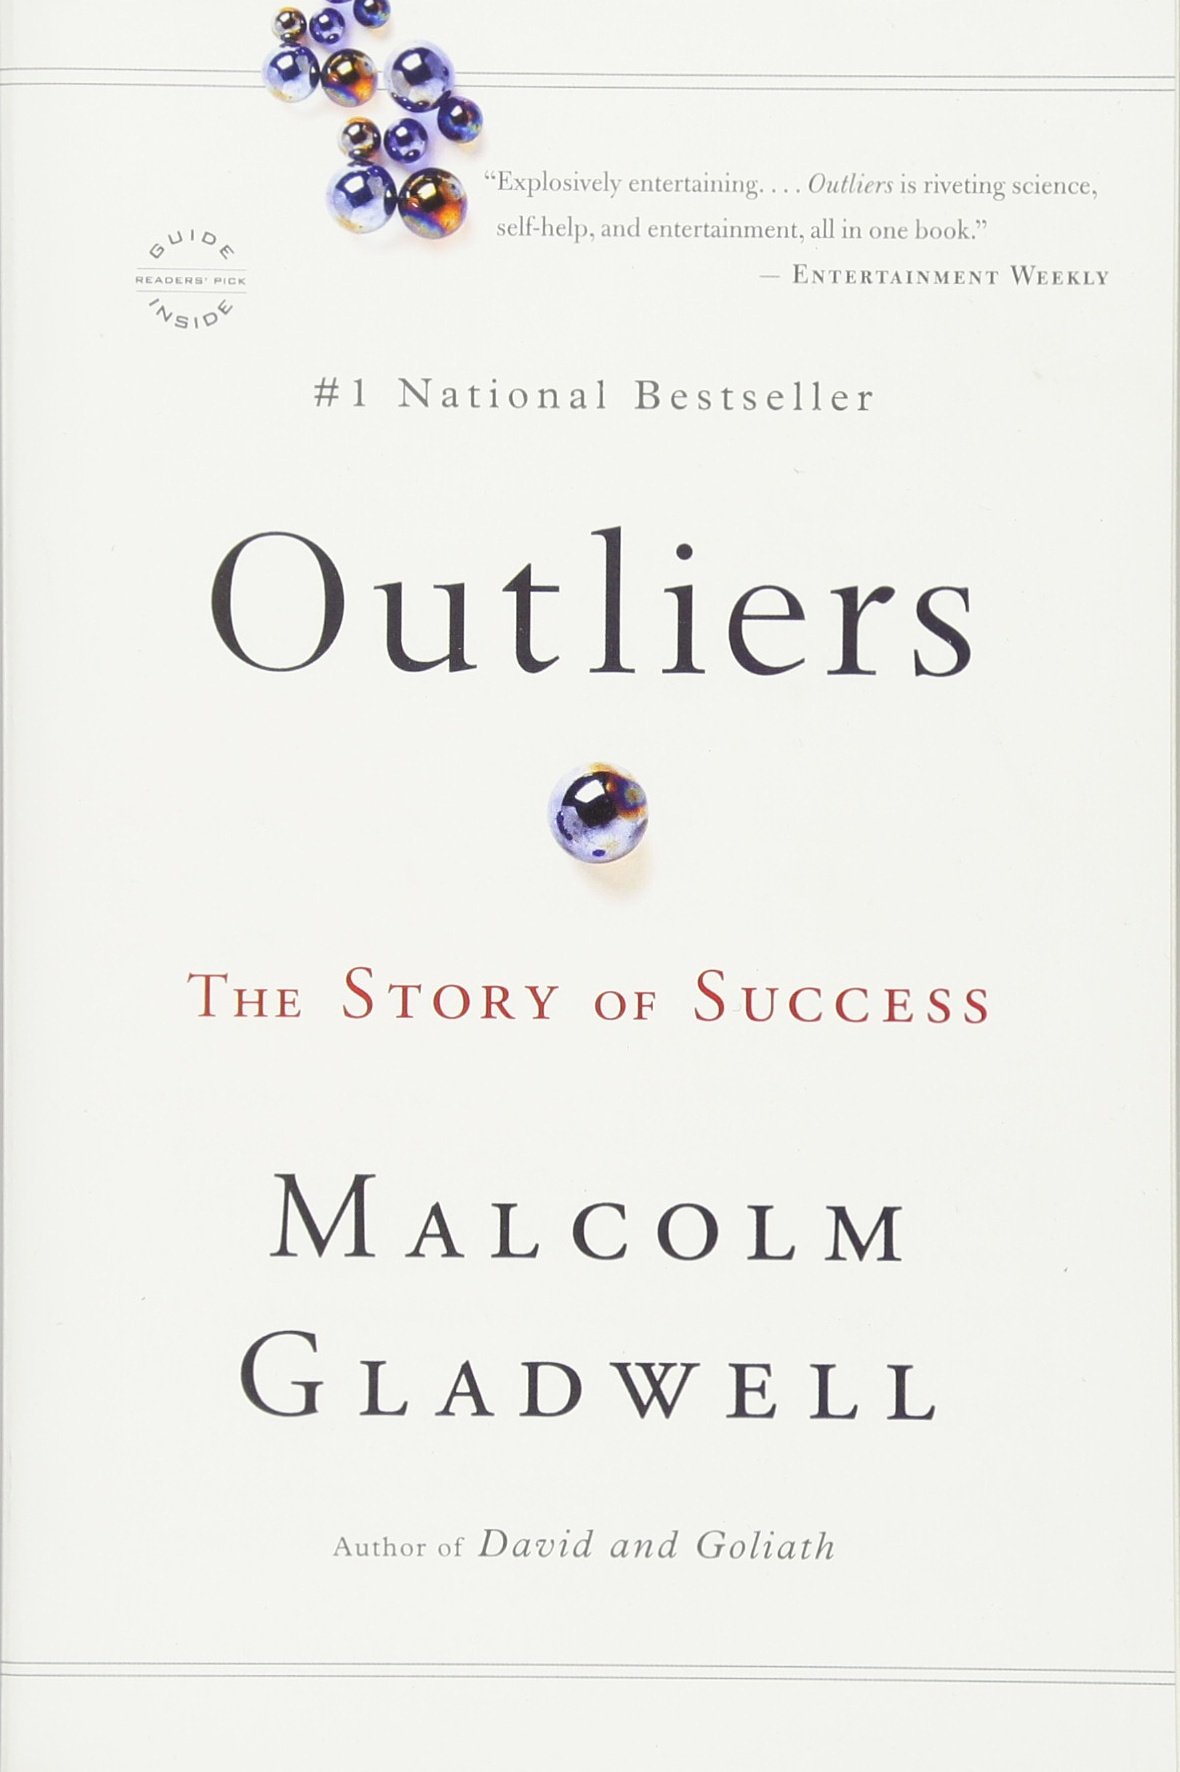 Outliers - the Story of Success by Malcolm Gladwell